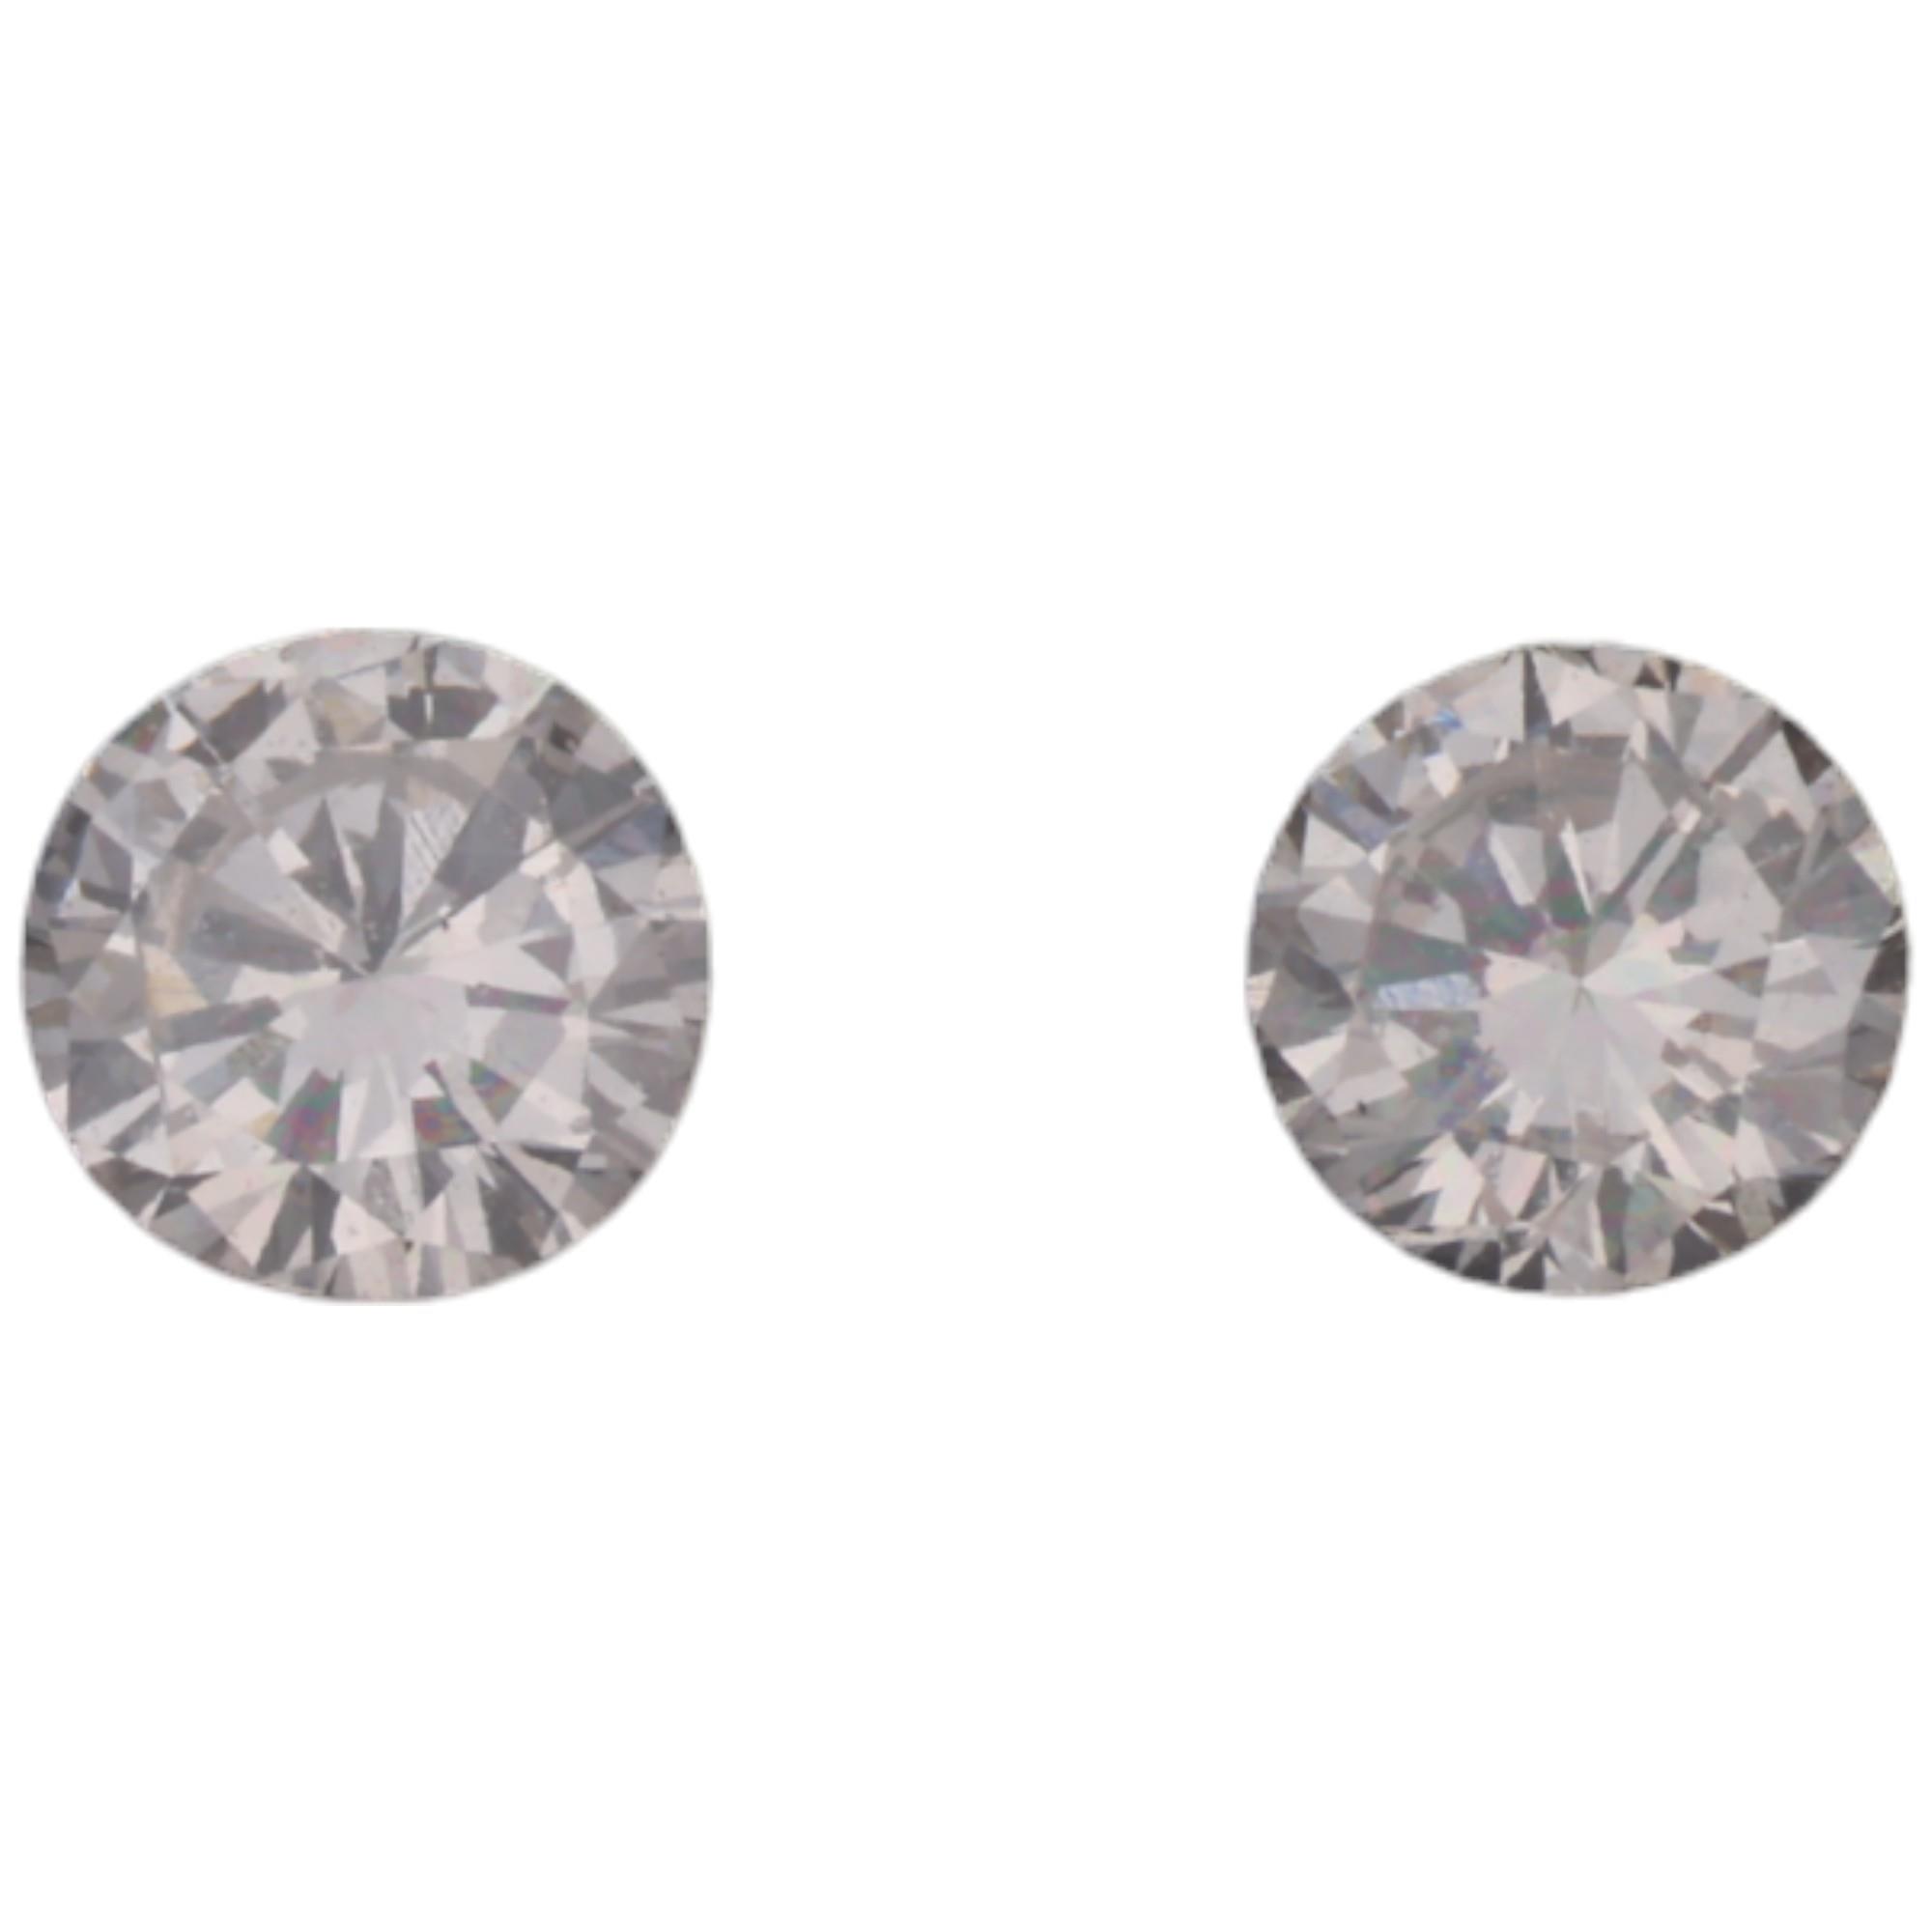 2 unmounted 0.11ct modern round brilliant-cut diamonds, colour approx H-I, clarity approx VS, from